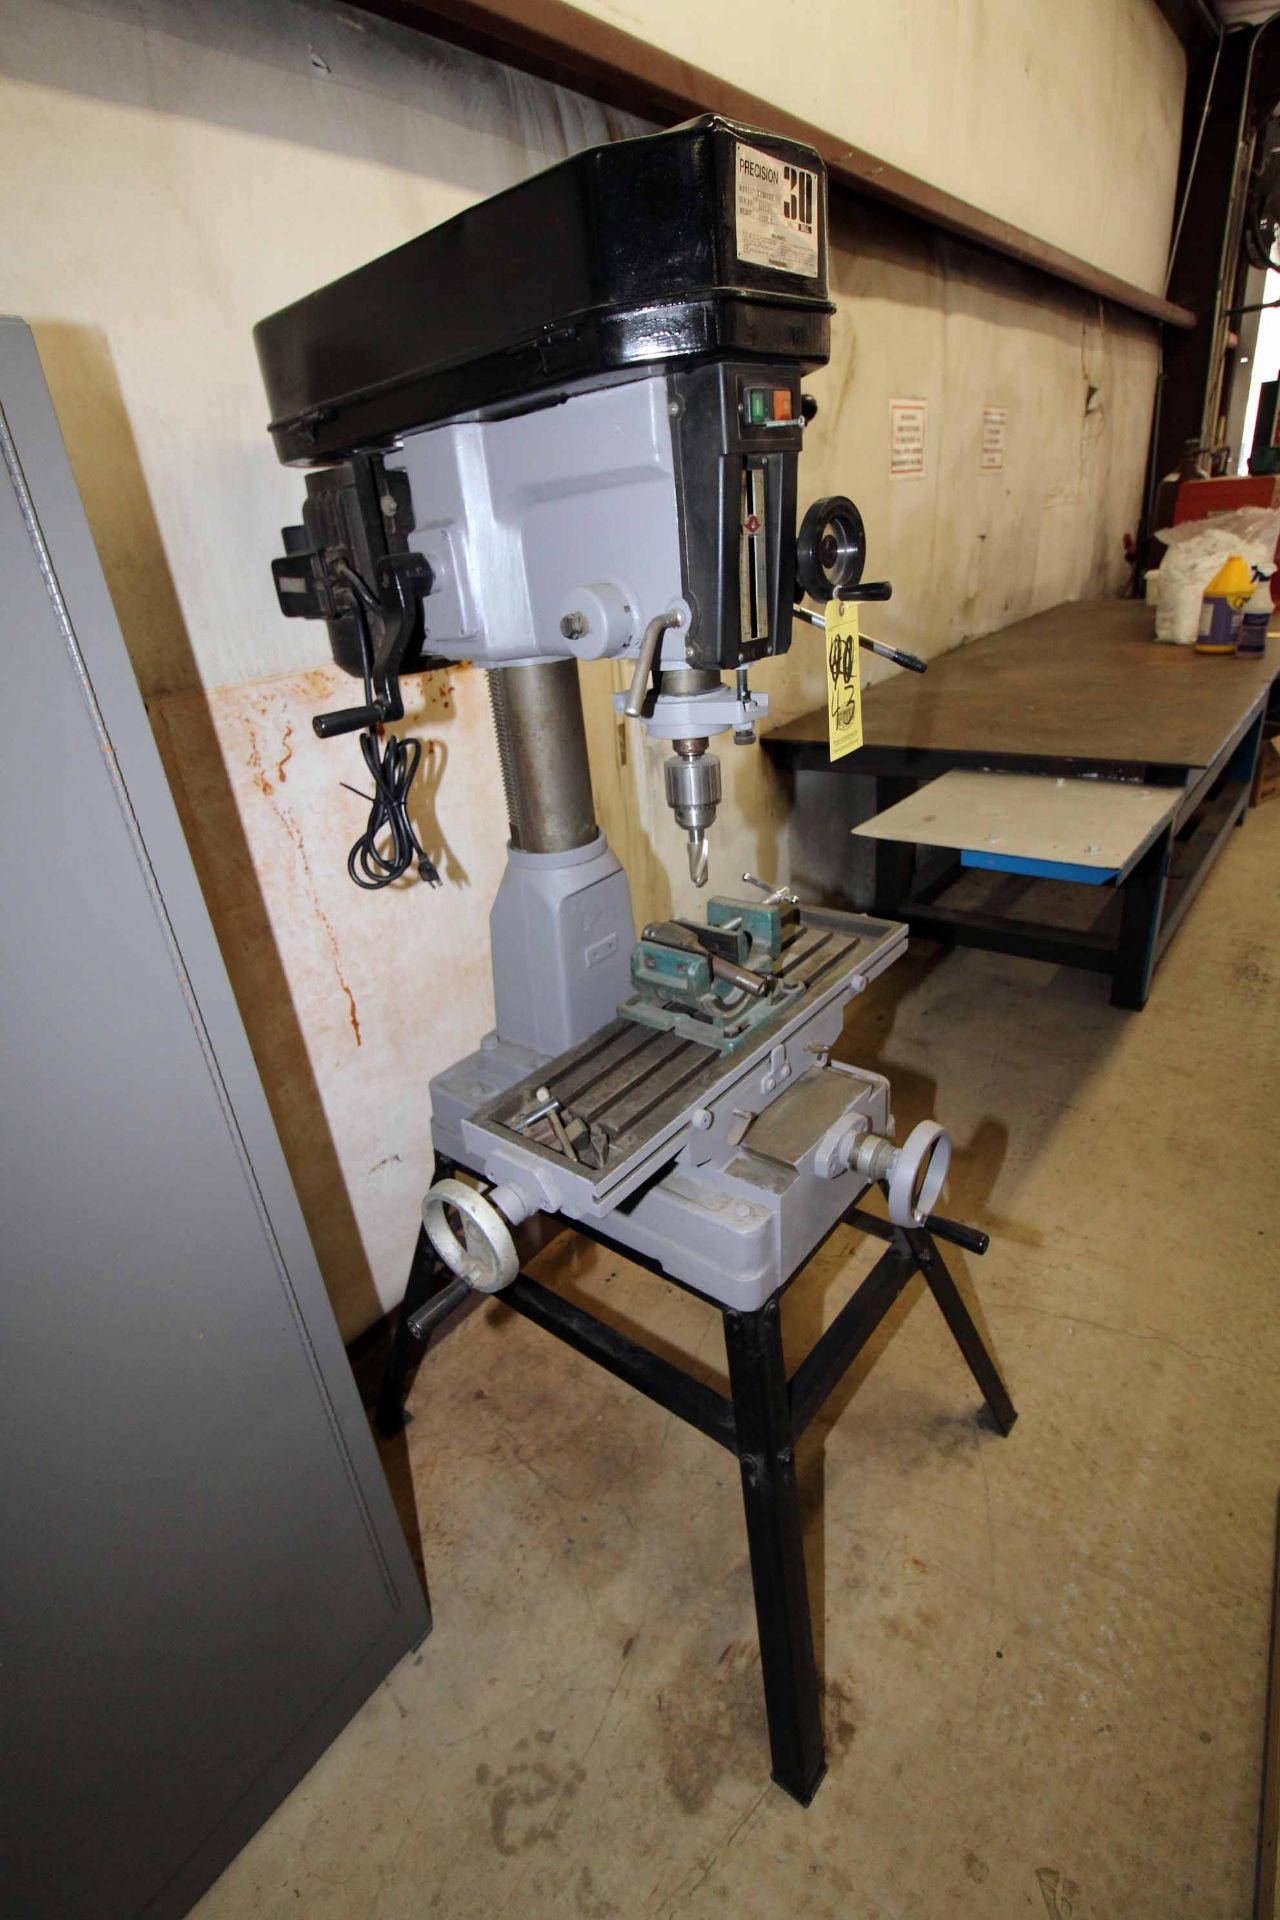 MILL DRILL, PRECISION 30 MDL. 1200109, spds: 100-2500 RPM, 8" x 28" table, S/N 947234 (Located at: